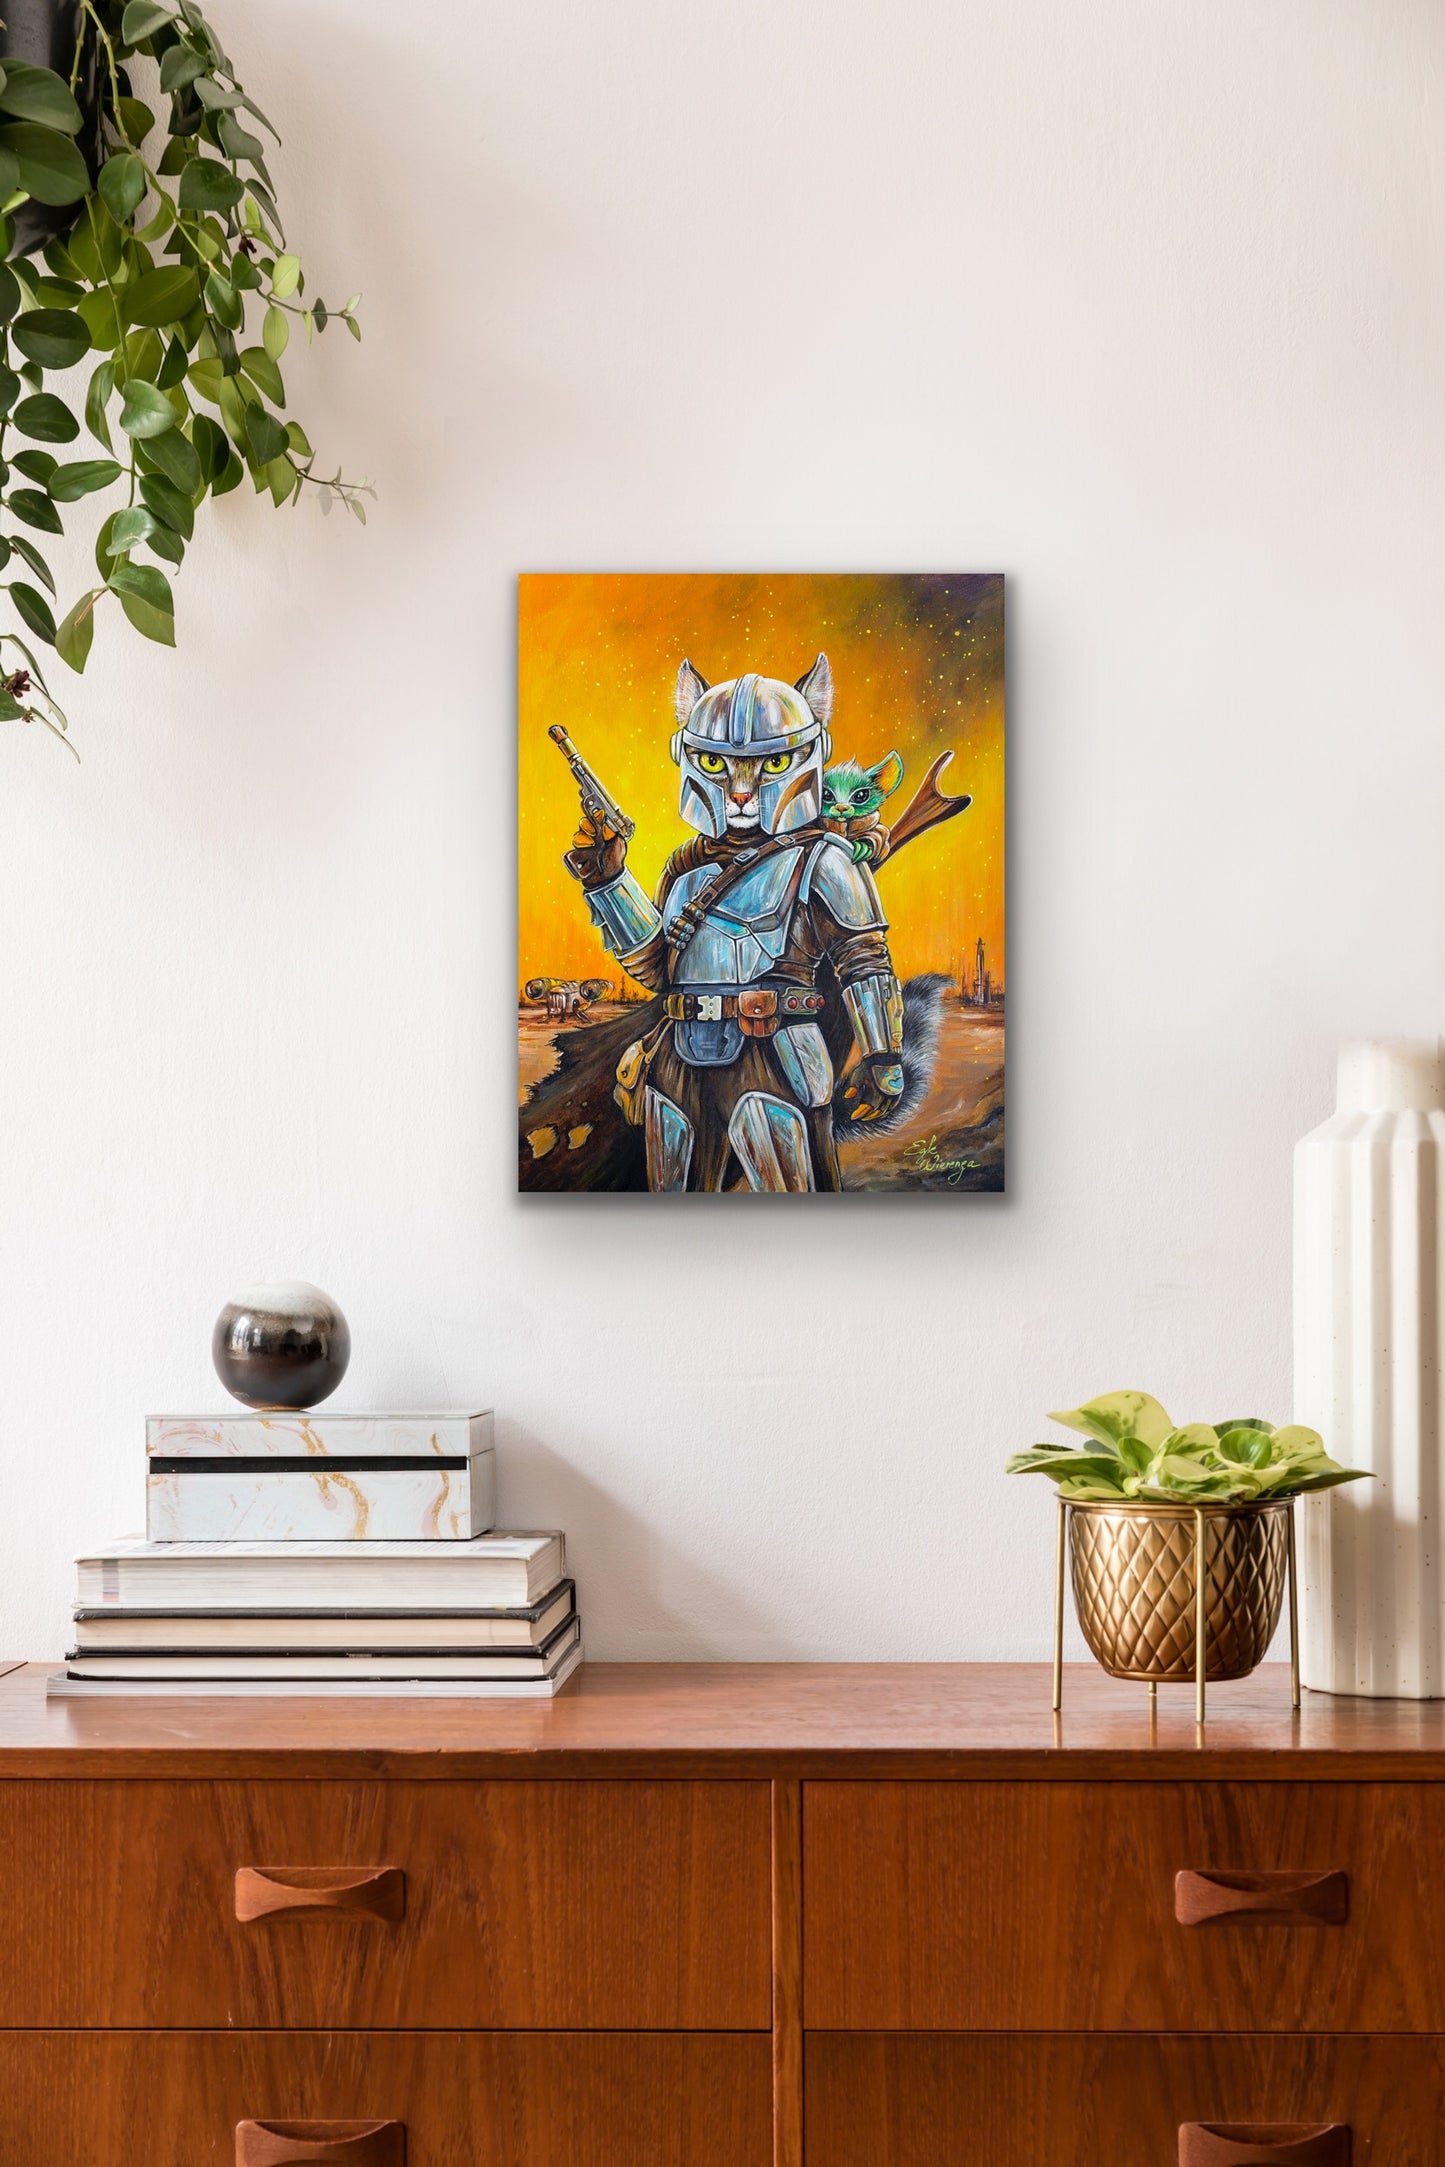 CANVAS "Meowdalorian" Open & Limited Edition